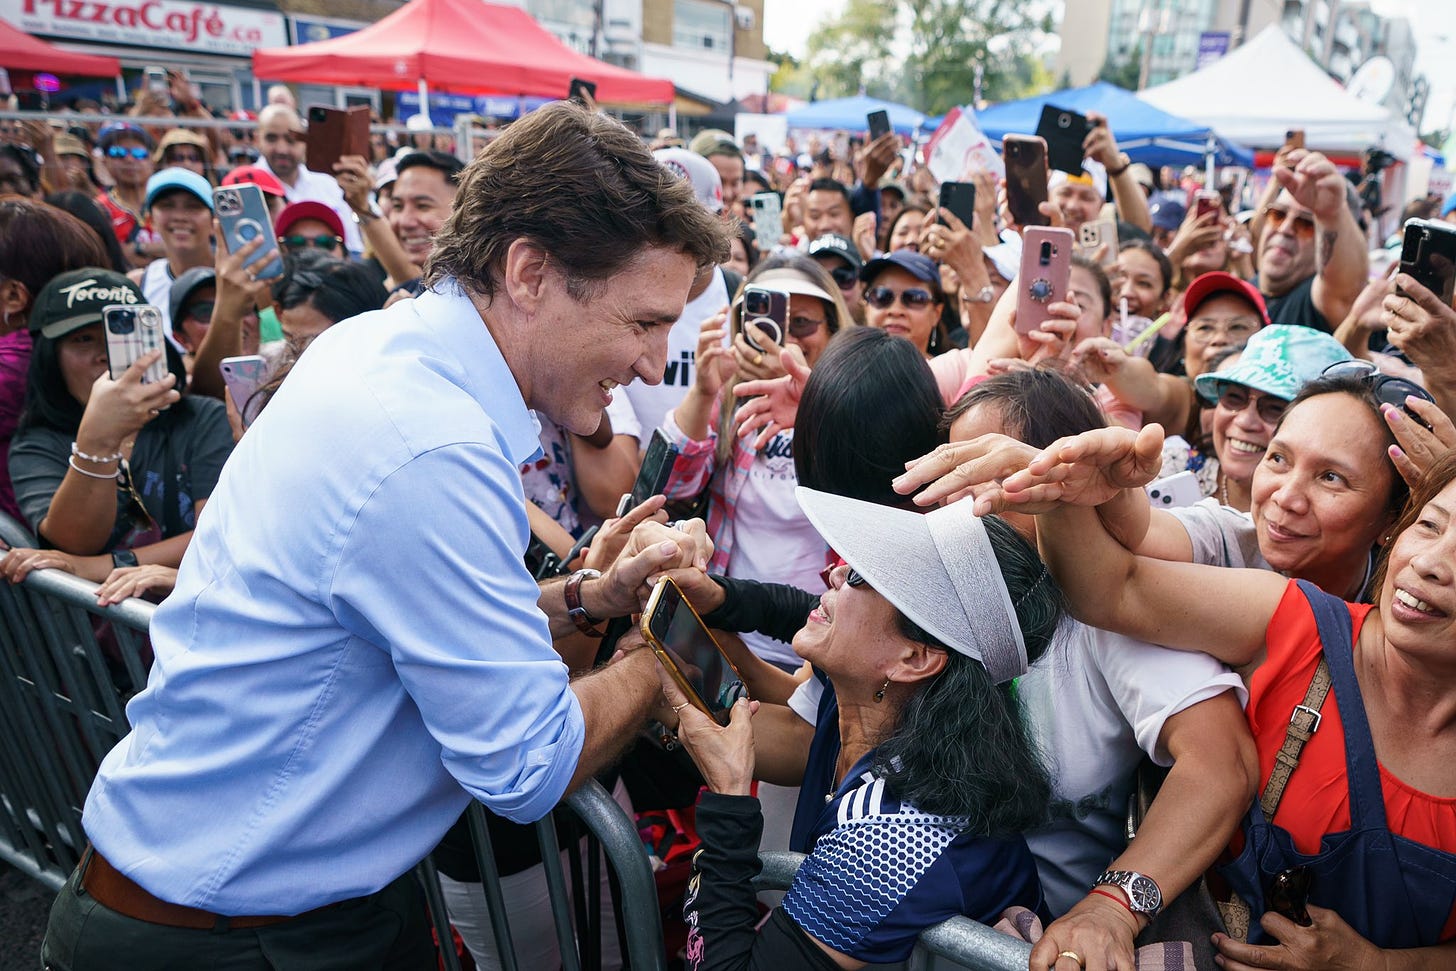 Prime Minister Justin Trudeau is shaking hands with a person. A large crowd of people is standing in front of him and beside him.